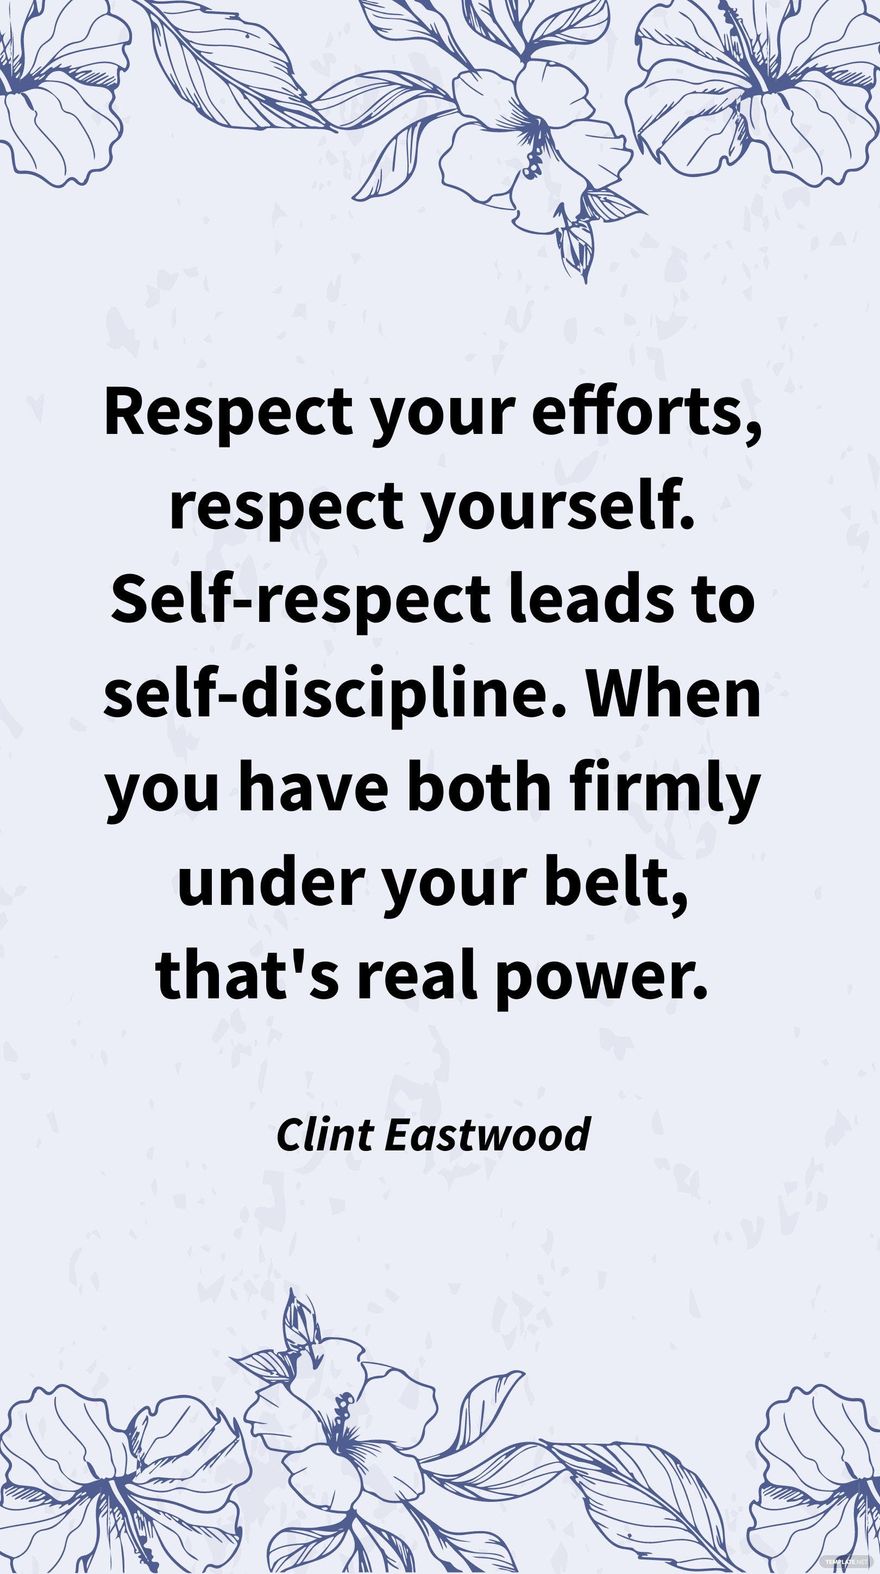 Clint Eastwood - Respect your efforts, respect yourself. Self-respect leads to self-discipline. When you have both firmly under your belt, that's real power.